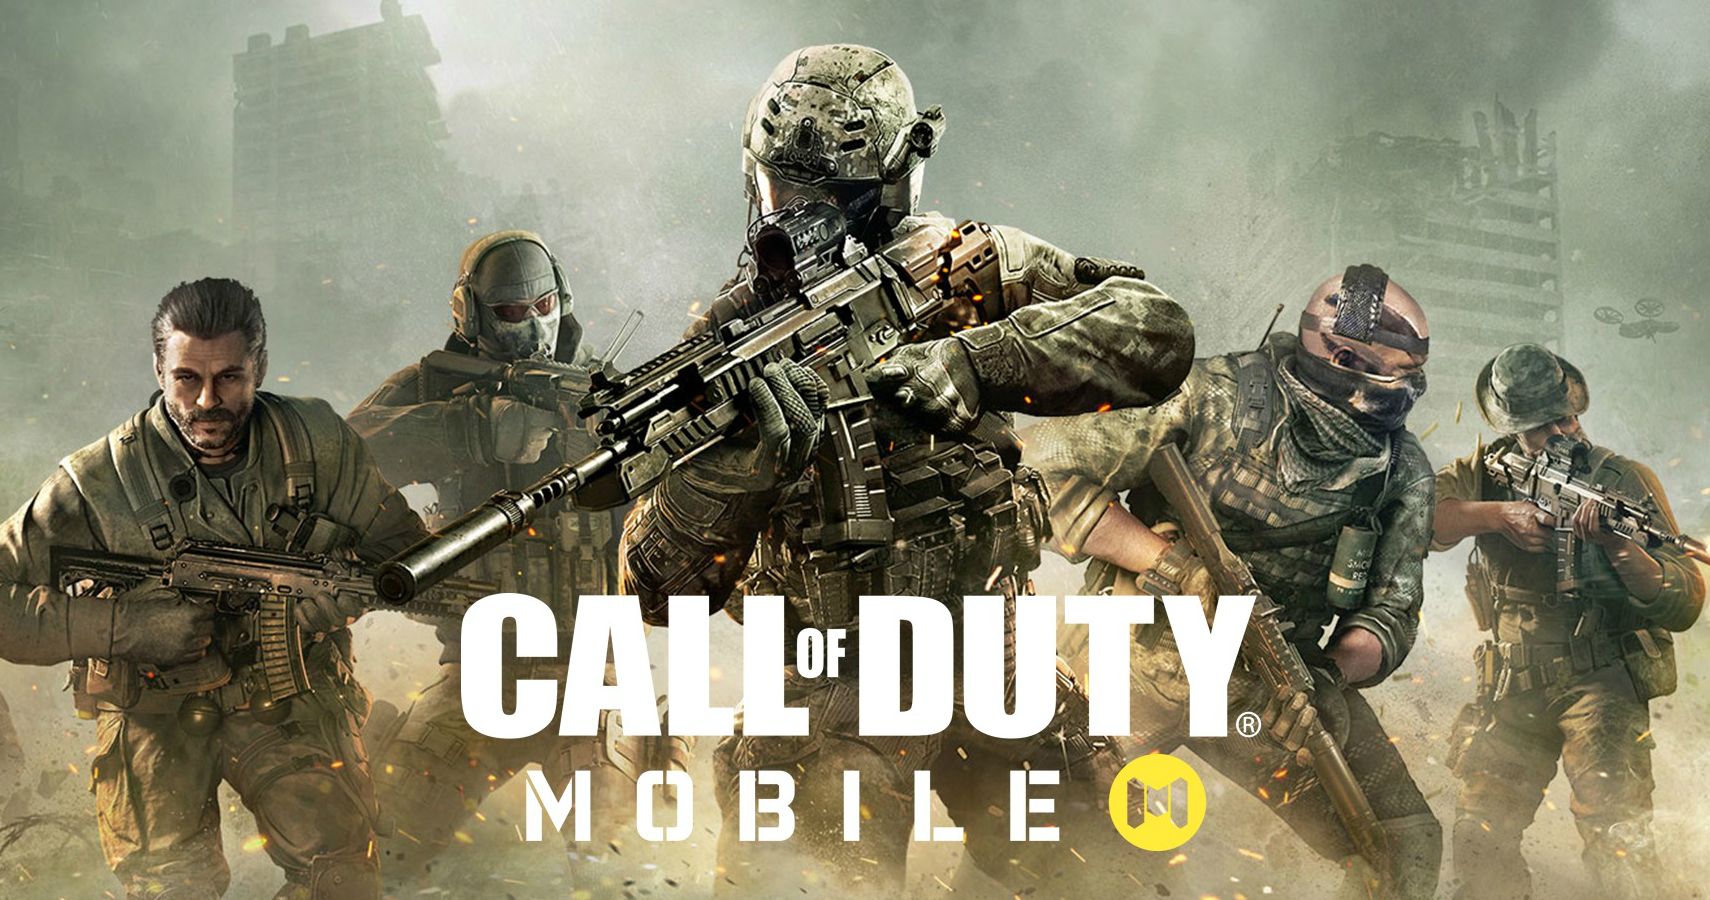 Call of Duty Mobile sees best first-week downloads of any mobile